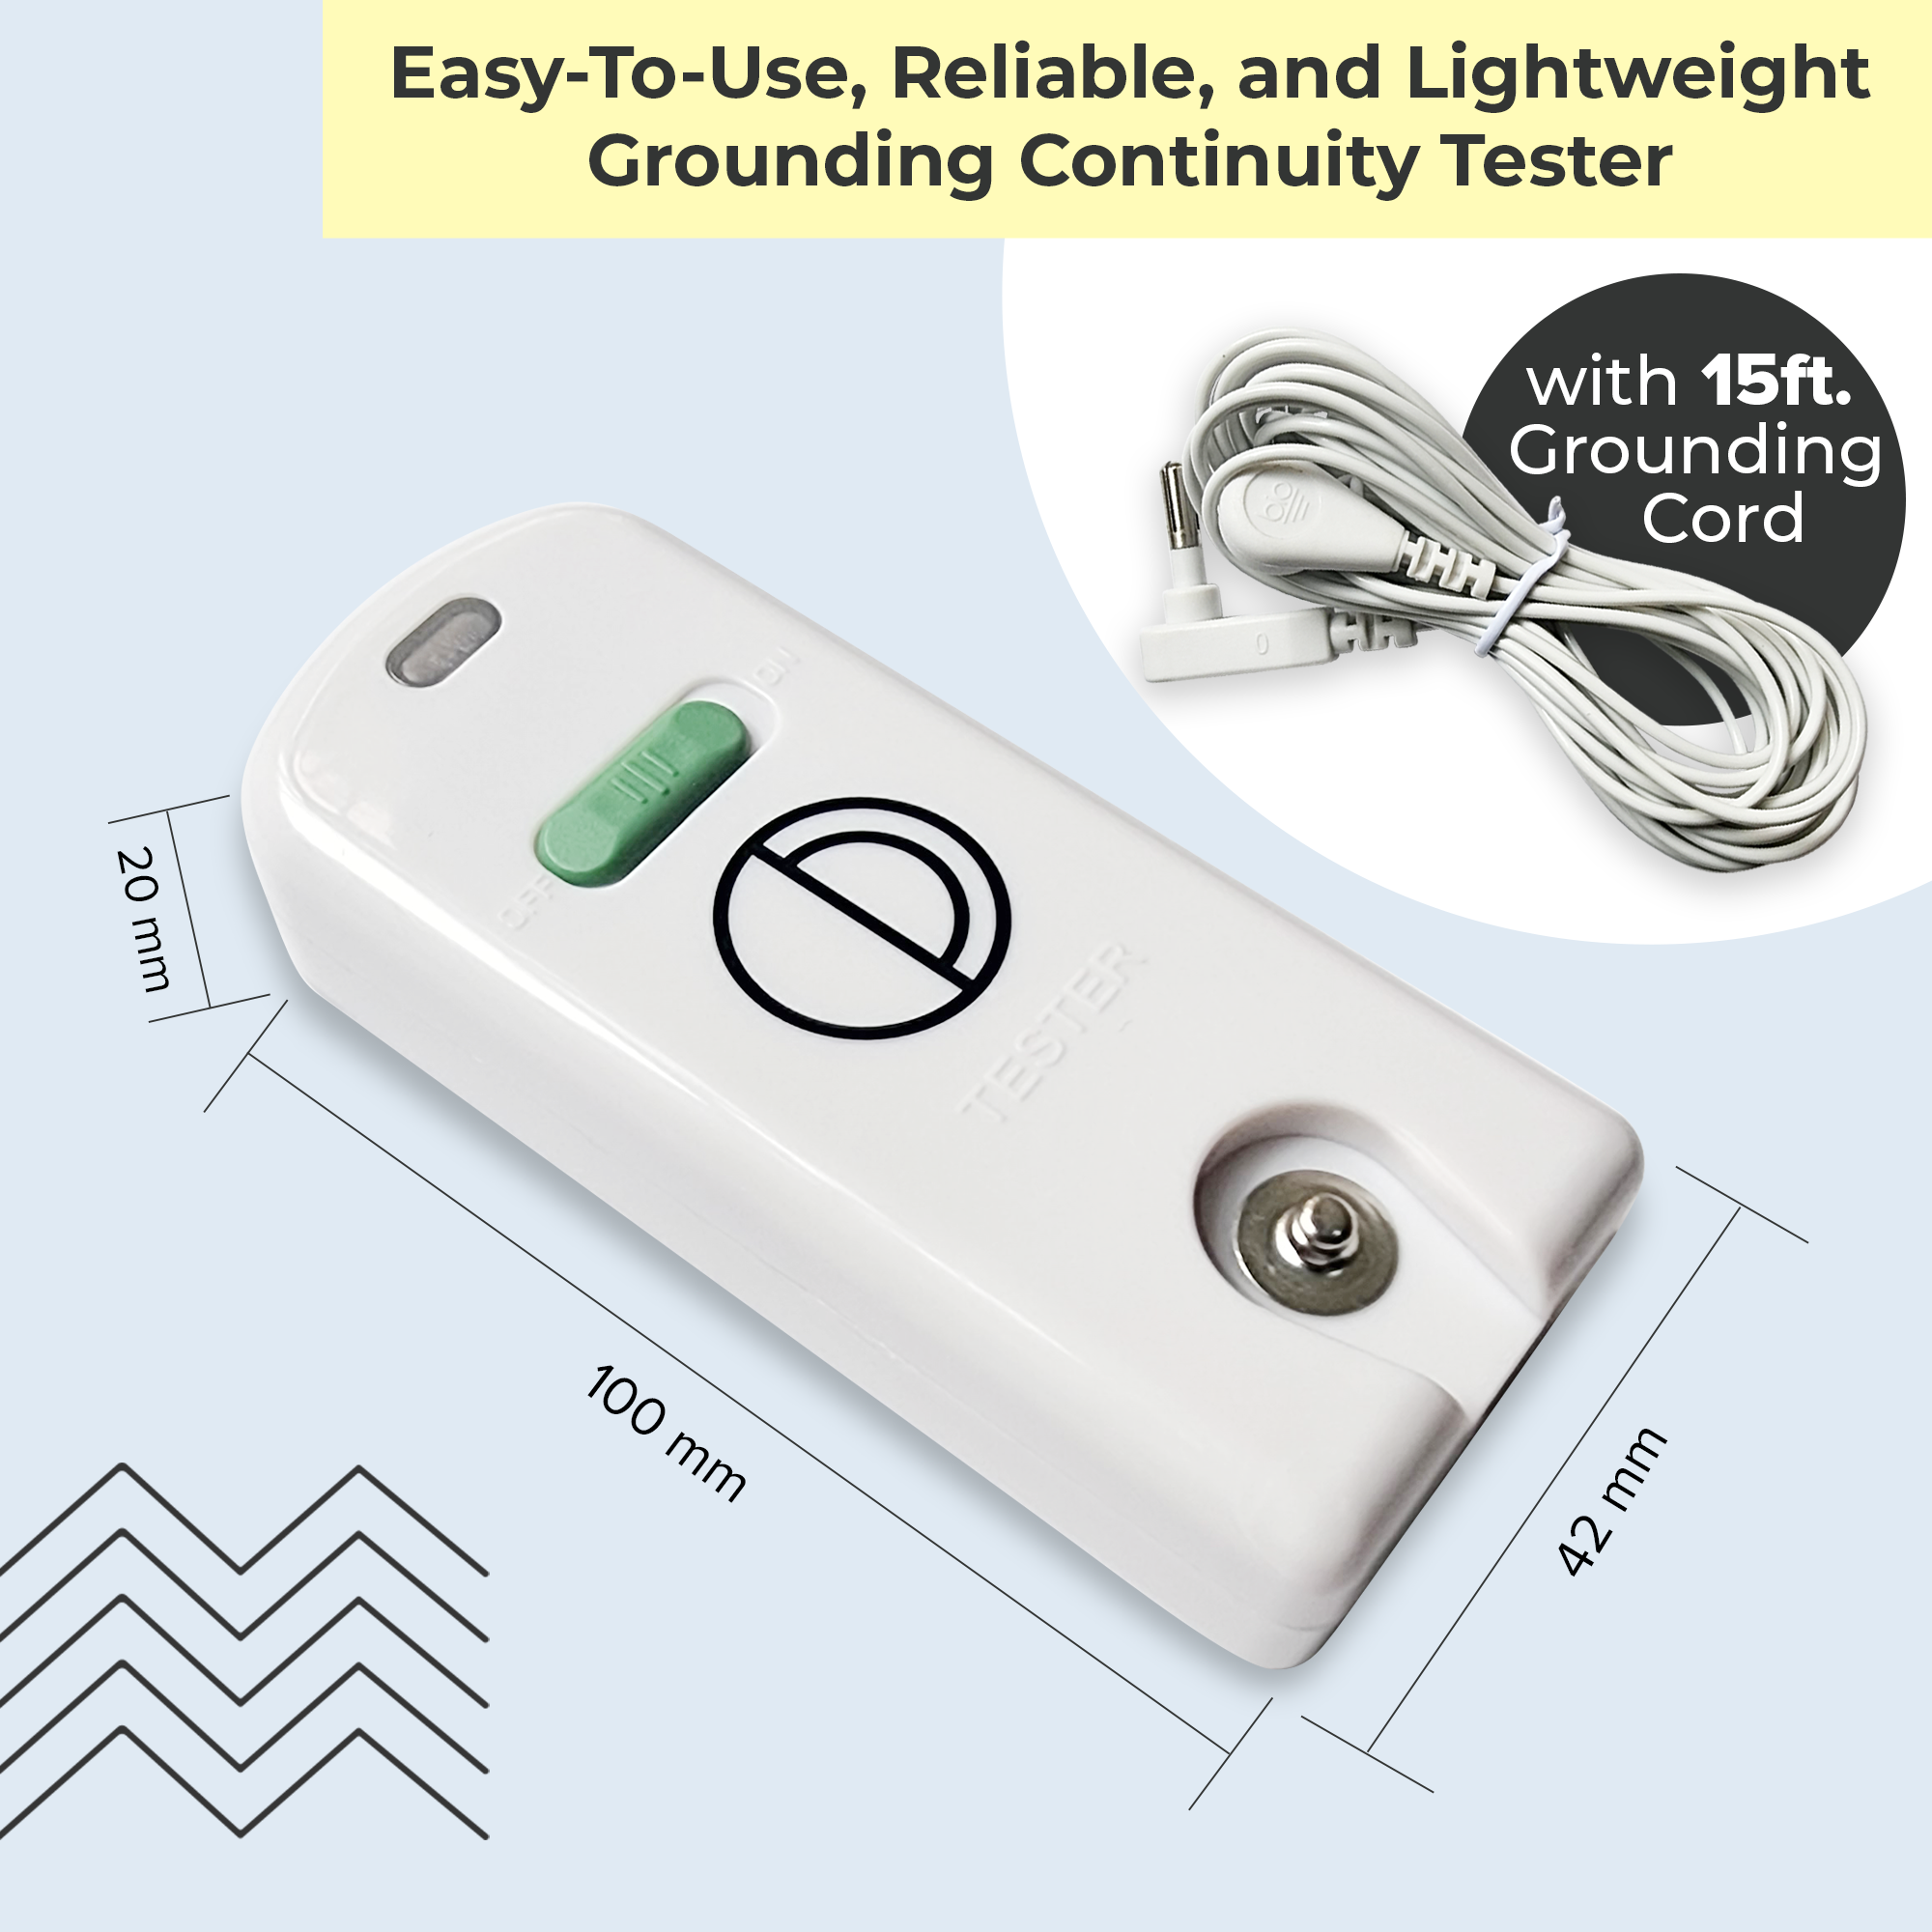 easy-to-use, reliable, and lightweight grounding continuity tester with 15 feet grounding cord